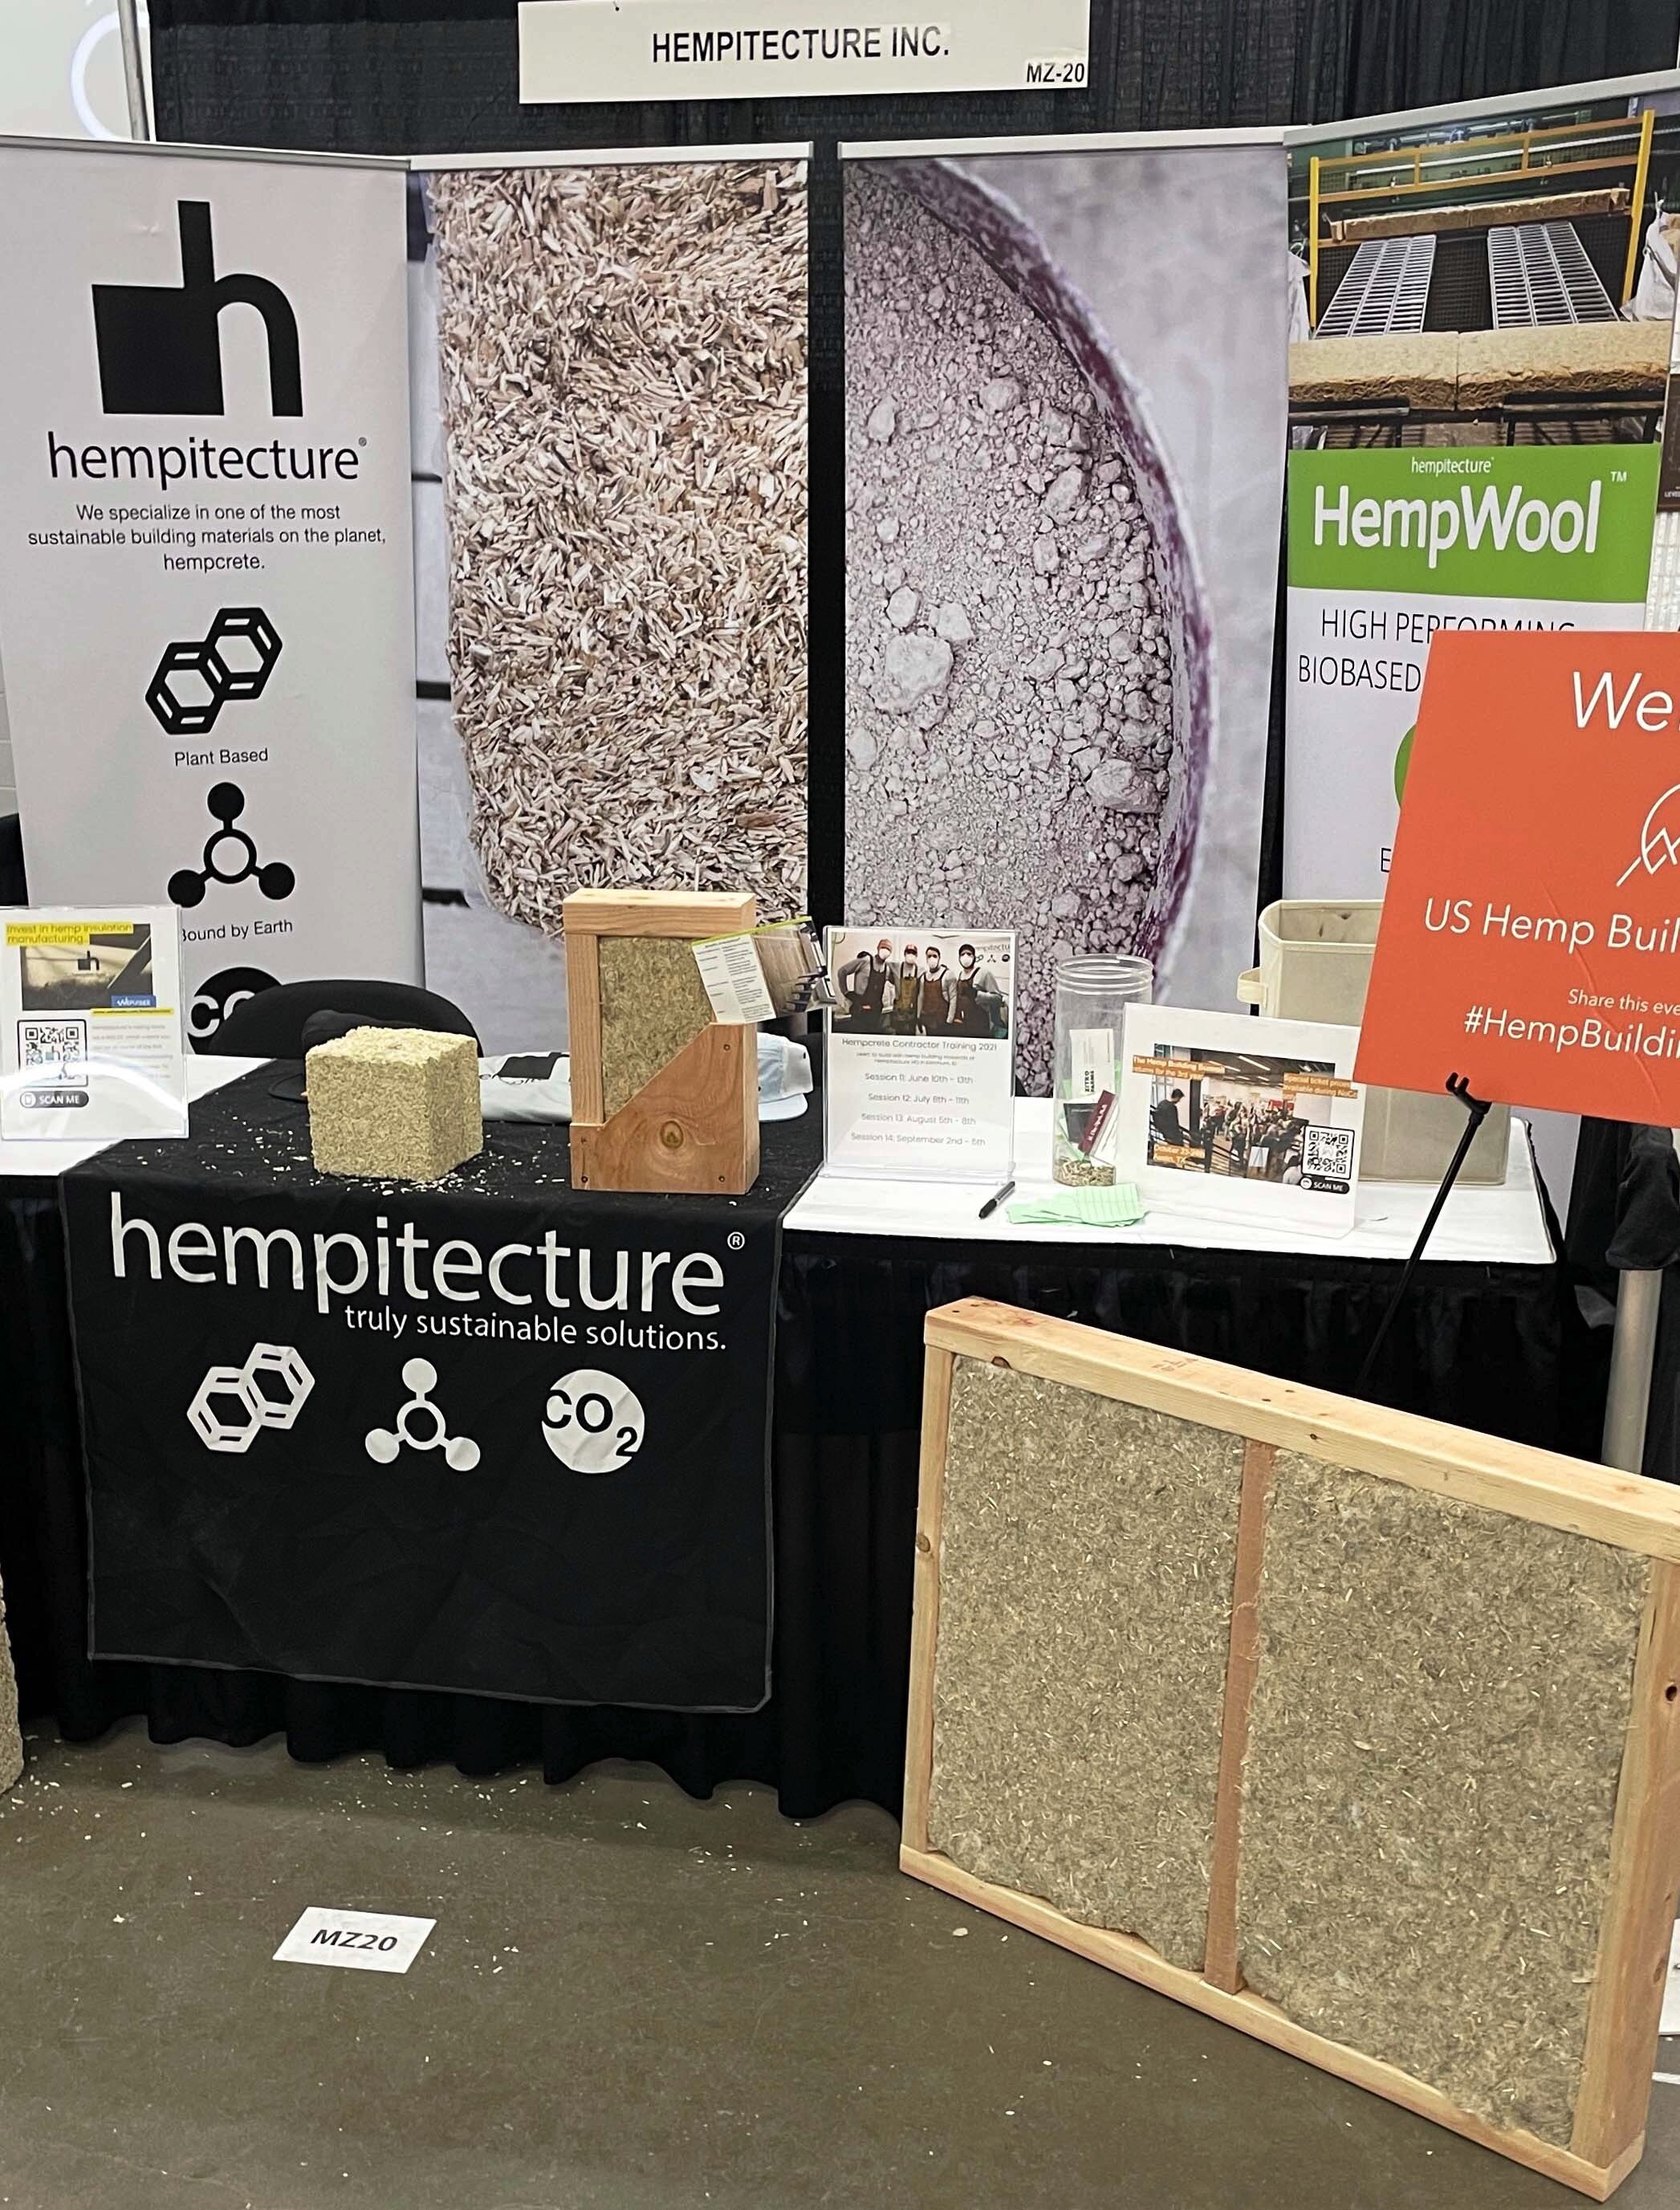 Hempitecture products, such as hempcrete and hemp fiber, on display at the NoCo Hemp Expo. March 2021.